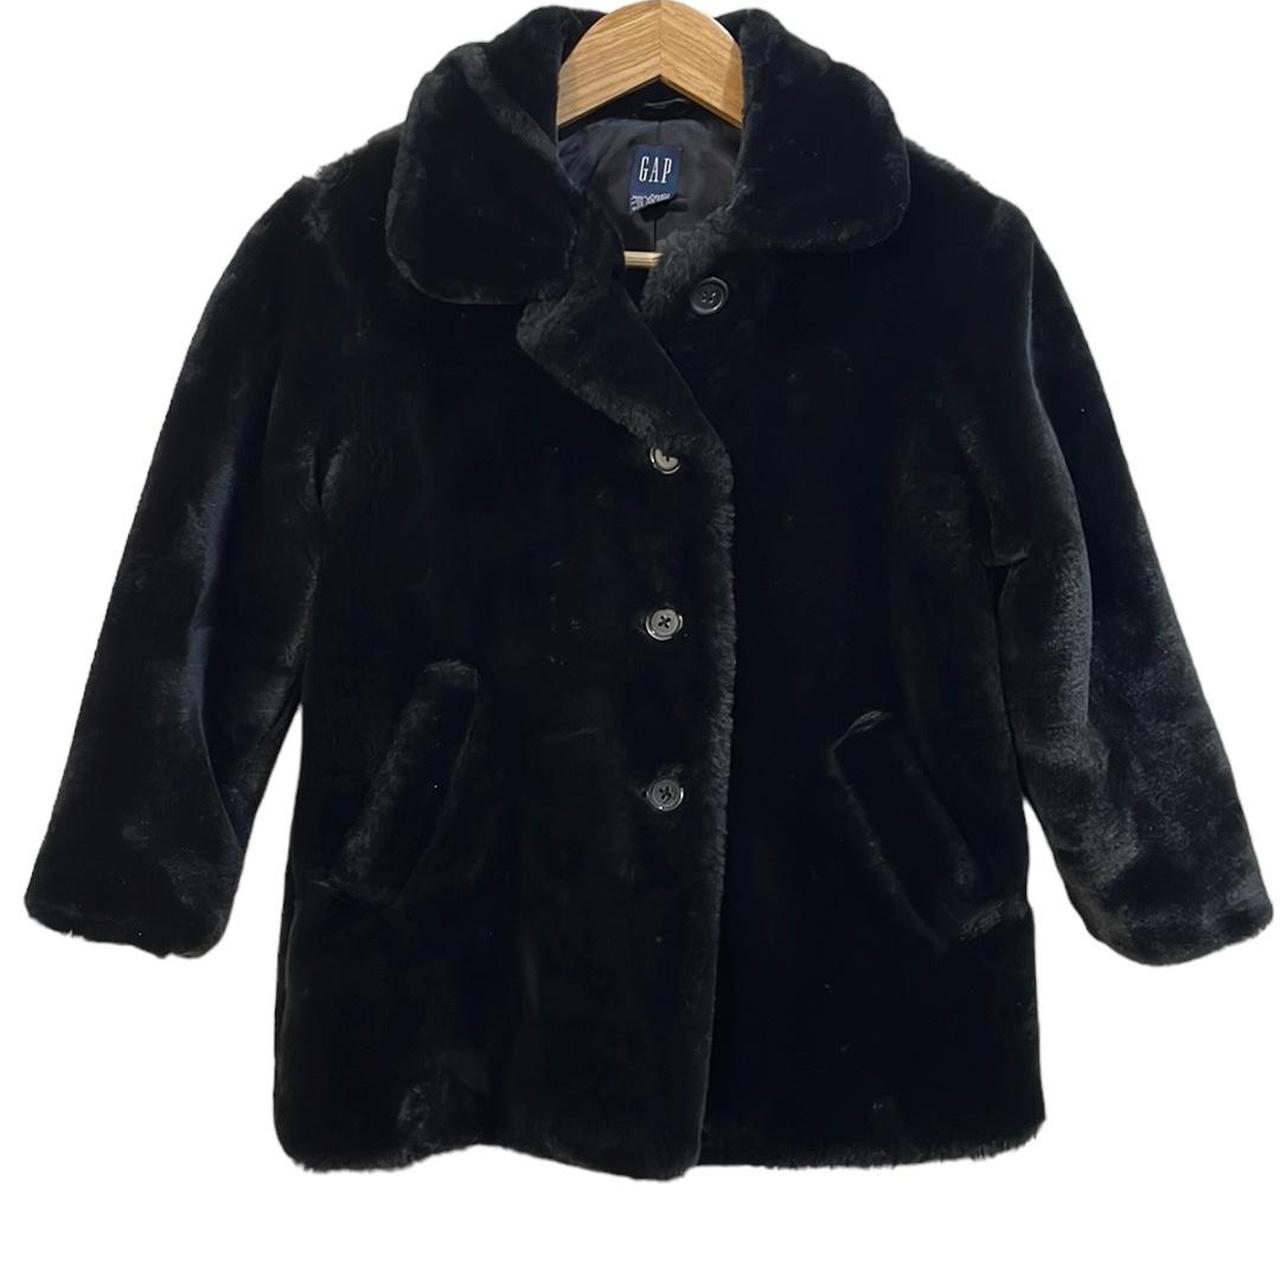 Gap Faux Fur Jacket Black with Buttons VERY GOOD... - Depop